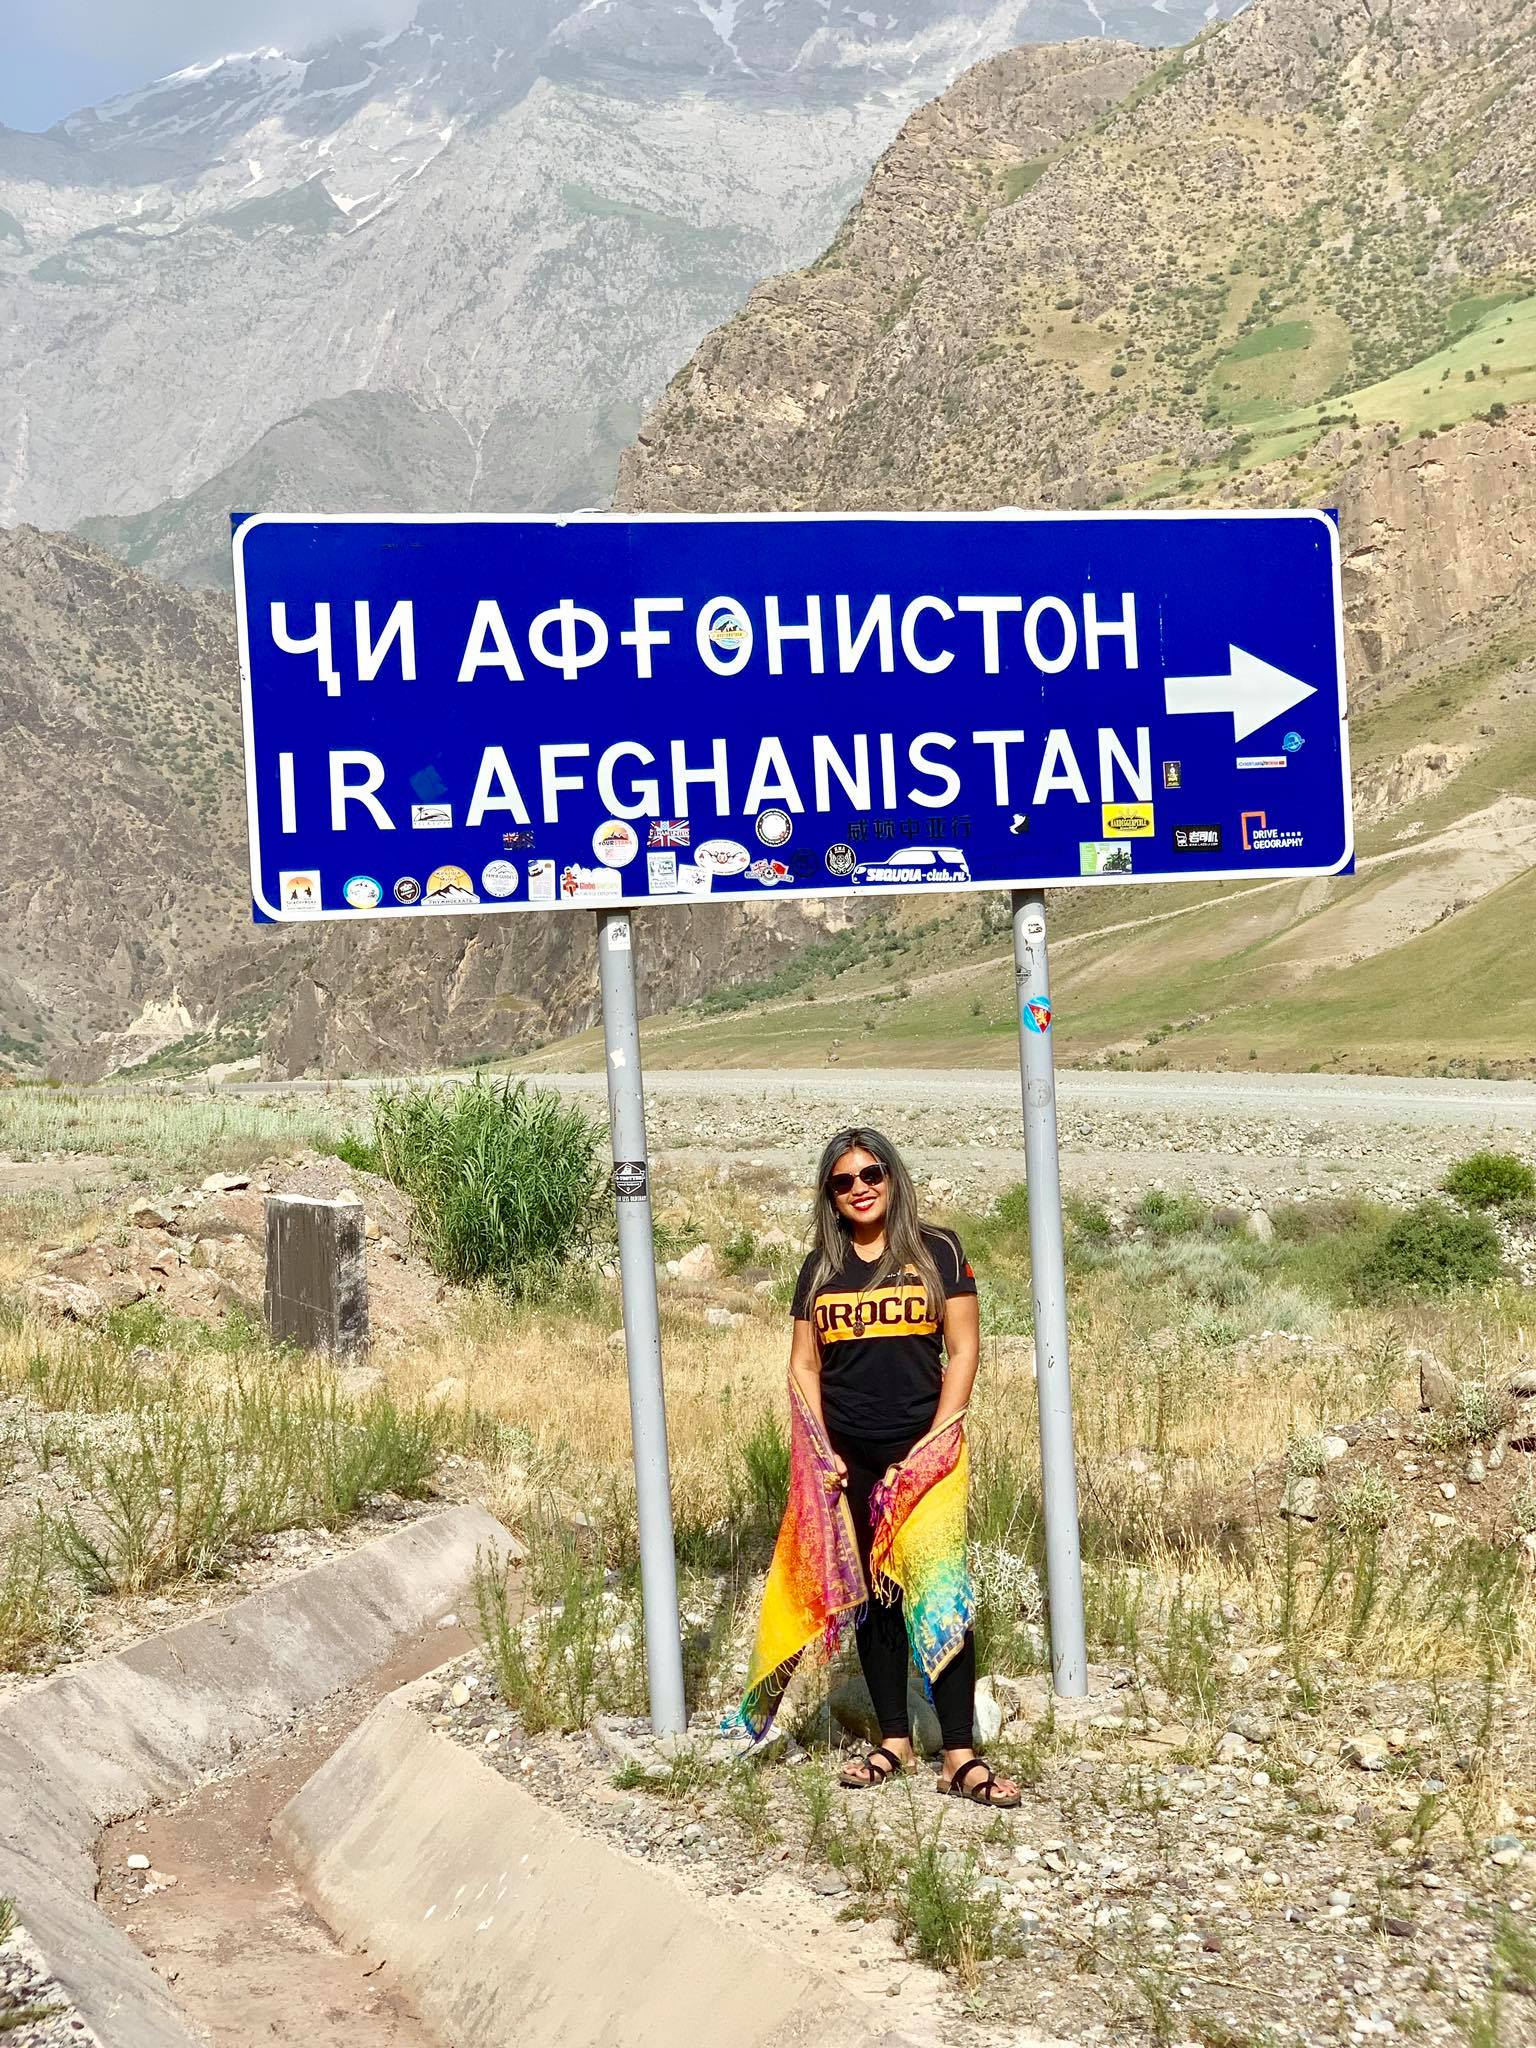 13 Things You Should Not Miss When You Travel the Pamir Highway in Tajikistan5